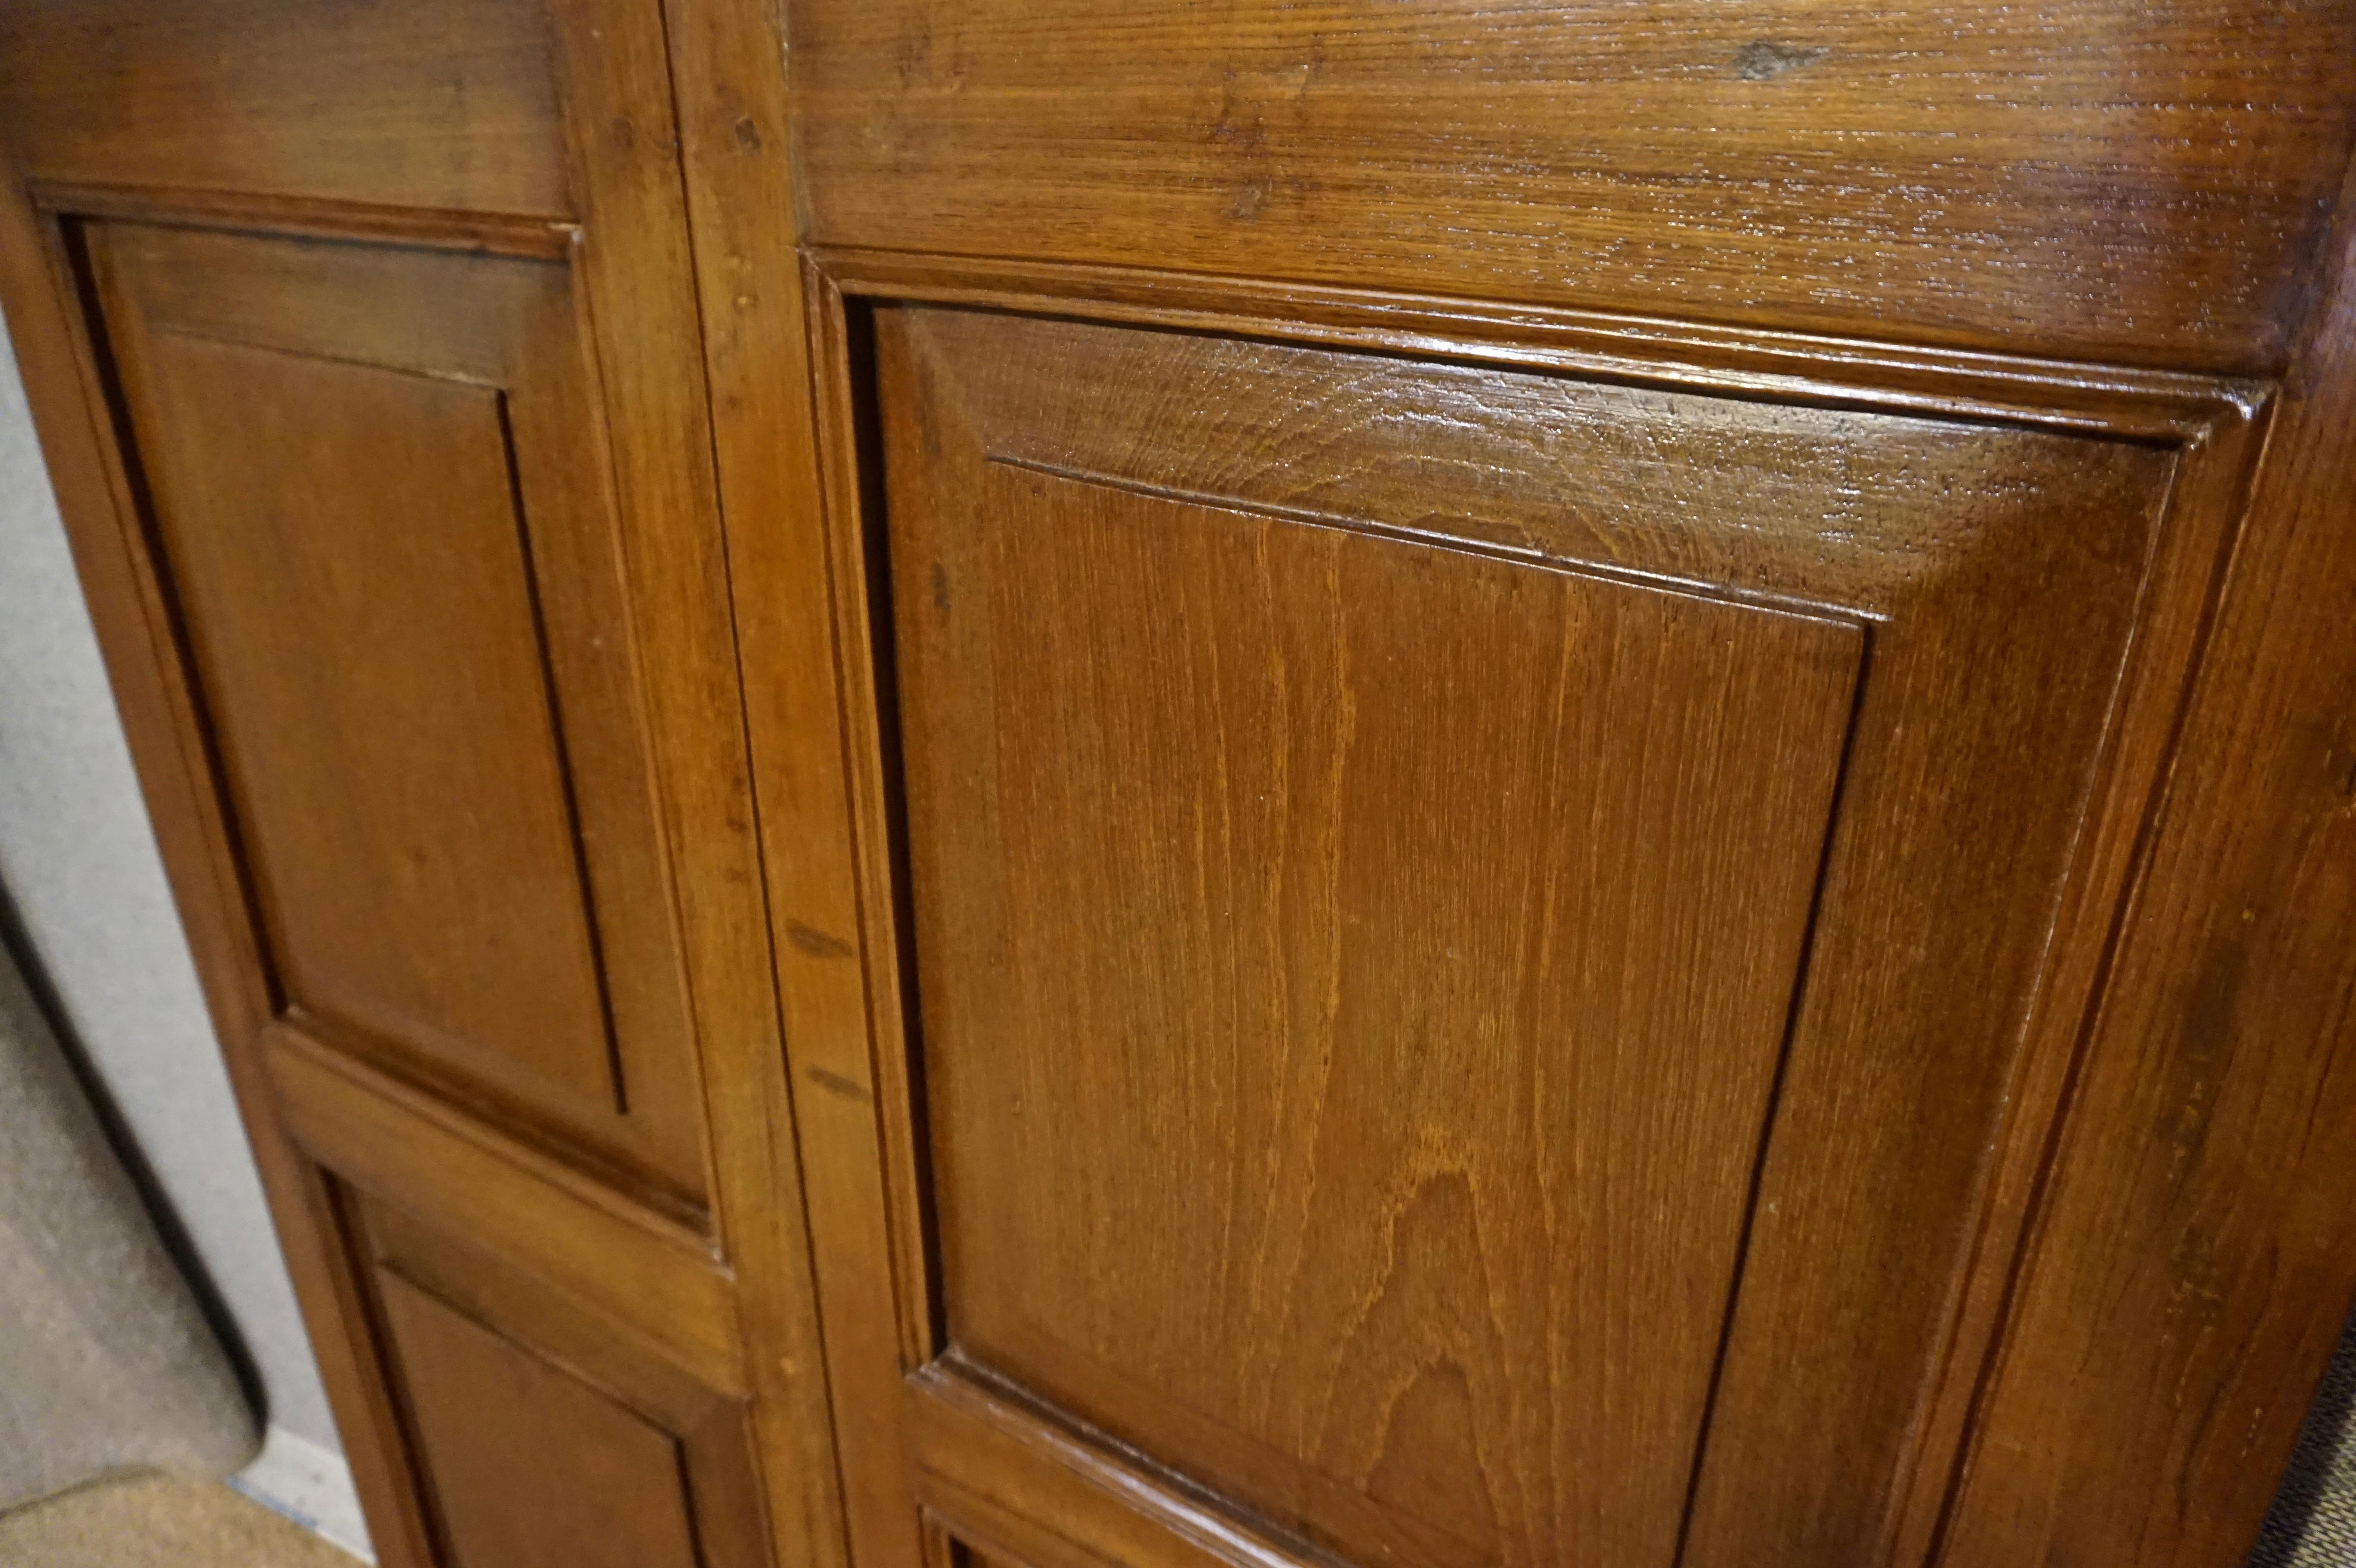 British Colonial Solid Teak Plantation Shutters with Panel Work Dovetailed For Sale 4